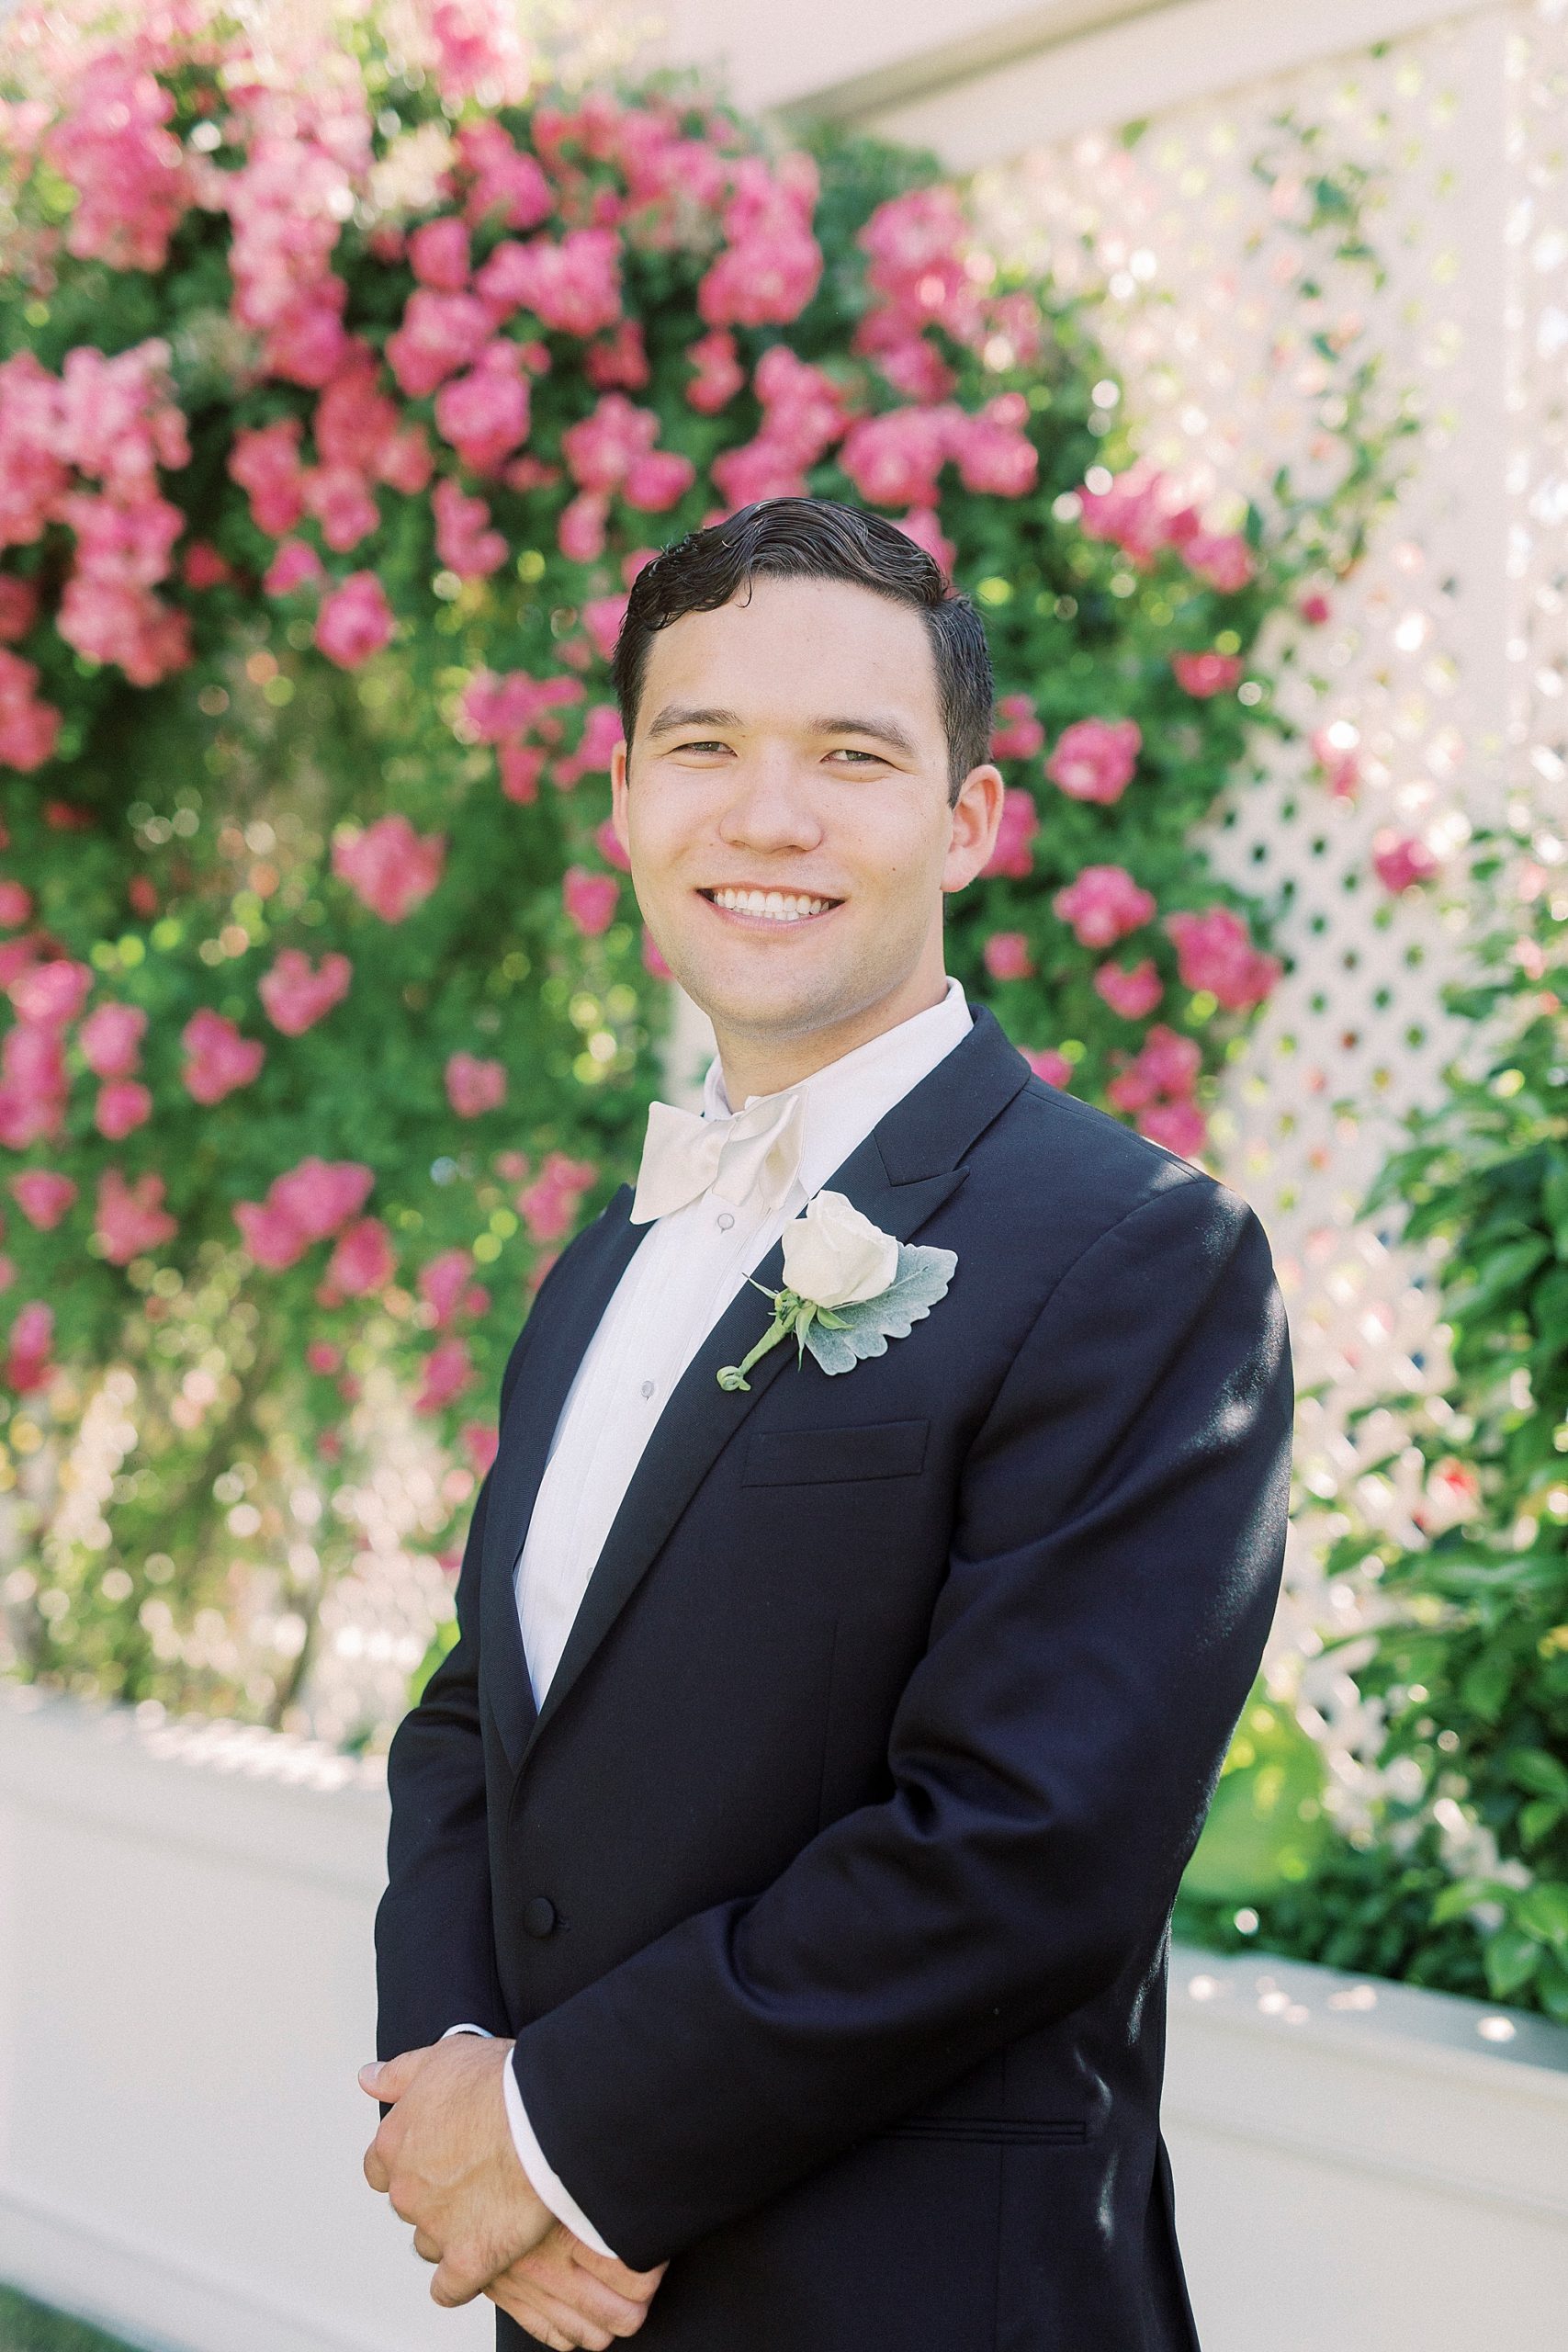 groom in classic tux with white boutonniere poses by pink flowers